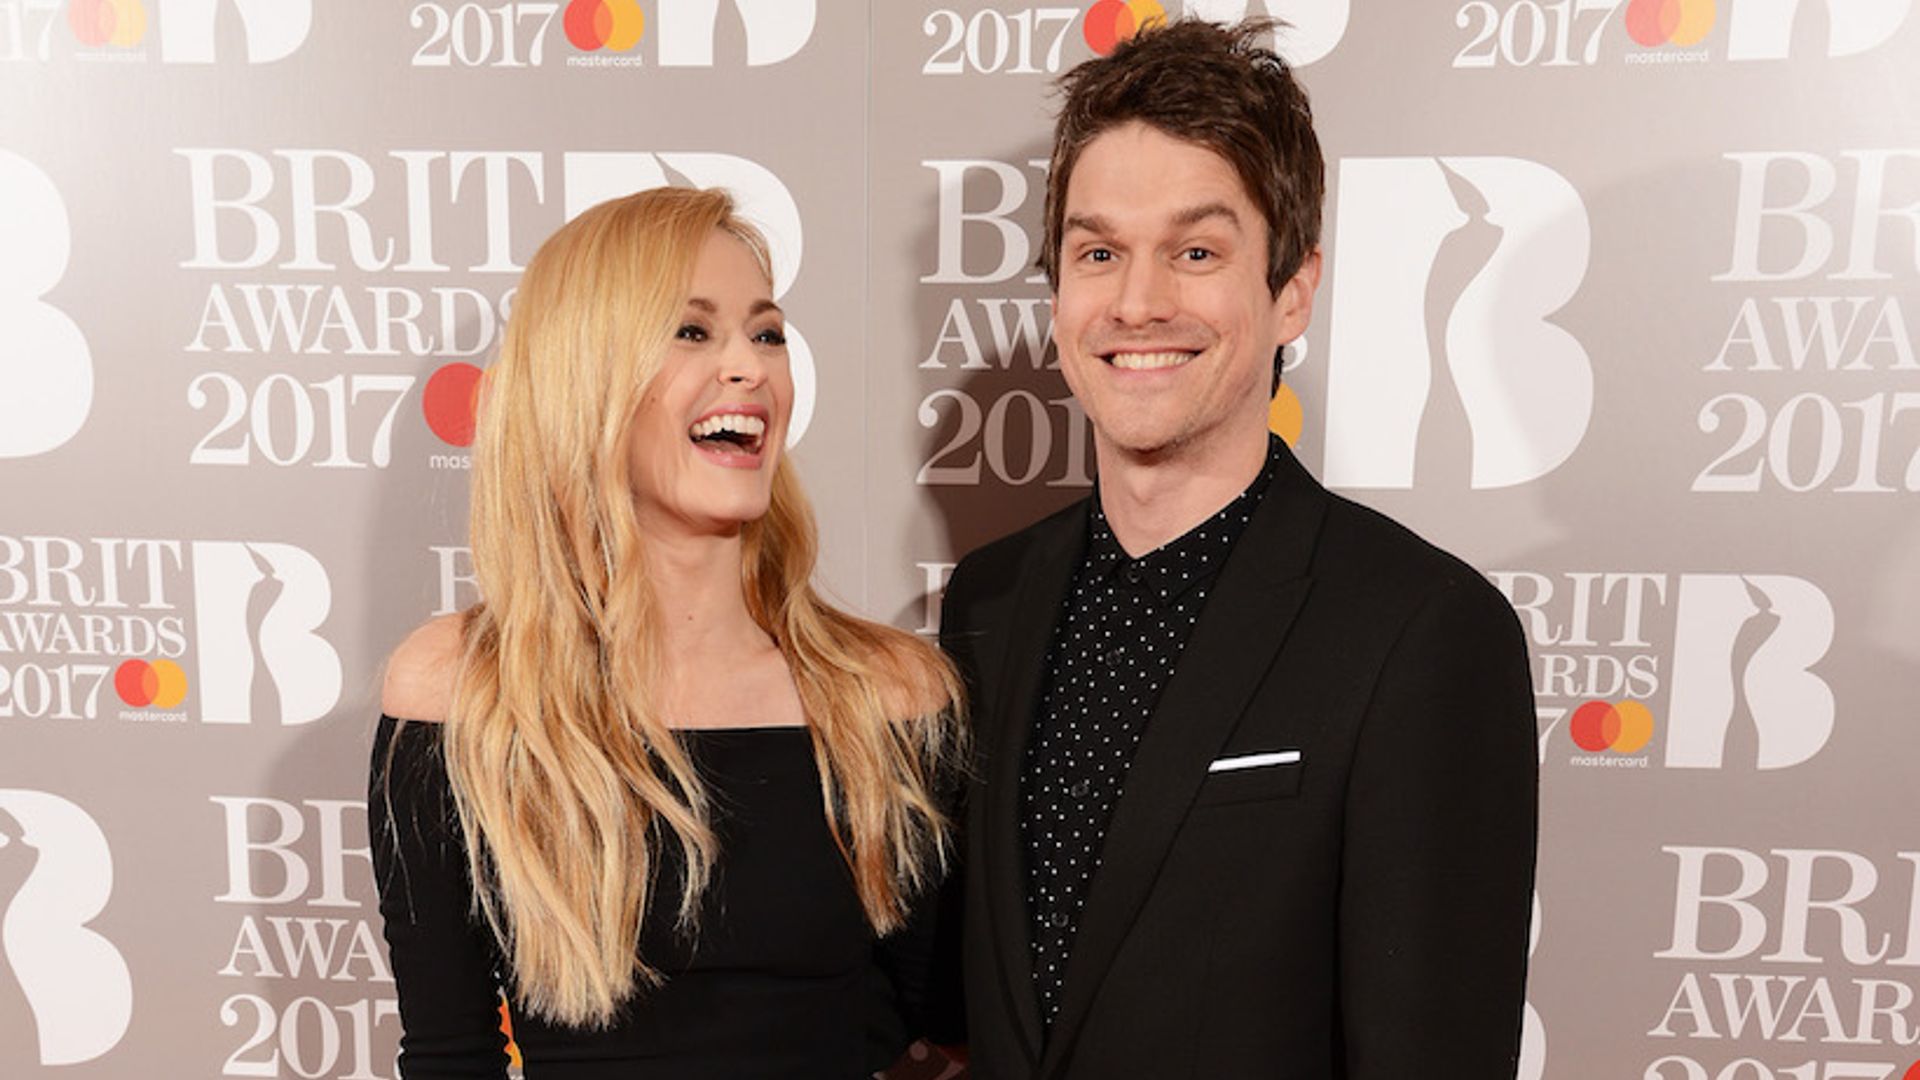 Fearne Cotton shares never-before-seen wedding photo to mark anniversary with Jesse Wood